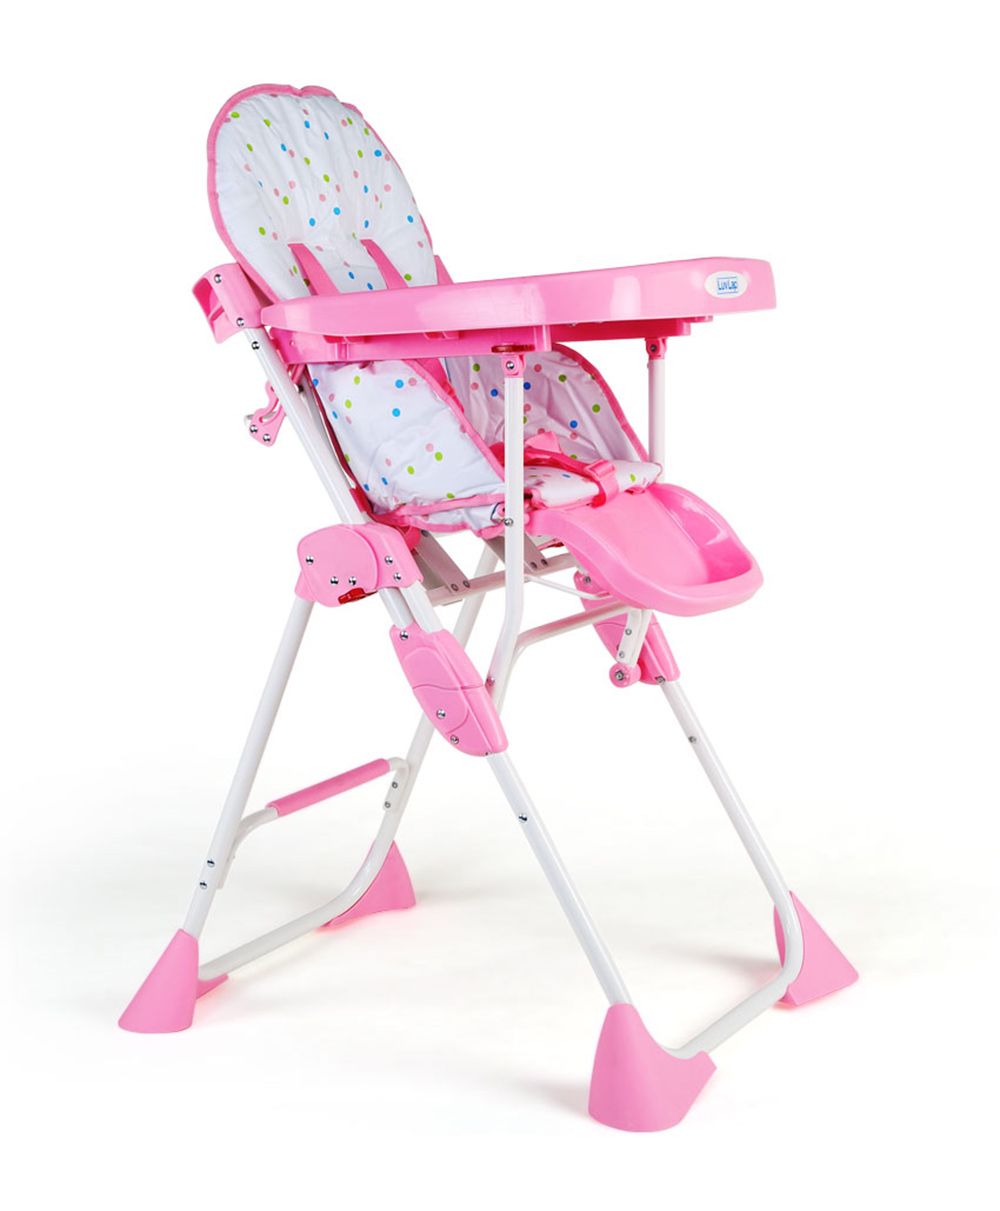 Luv Lap Baby Comfy High Chair (Pink)